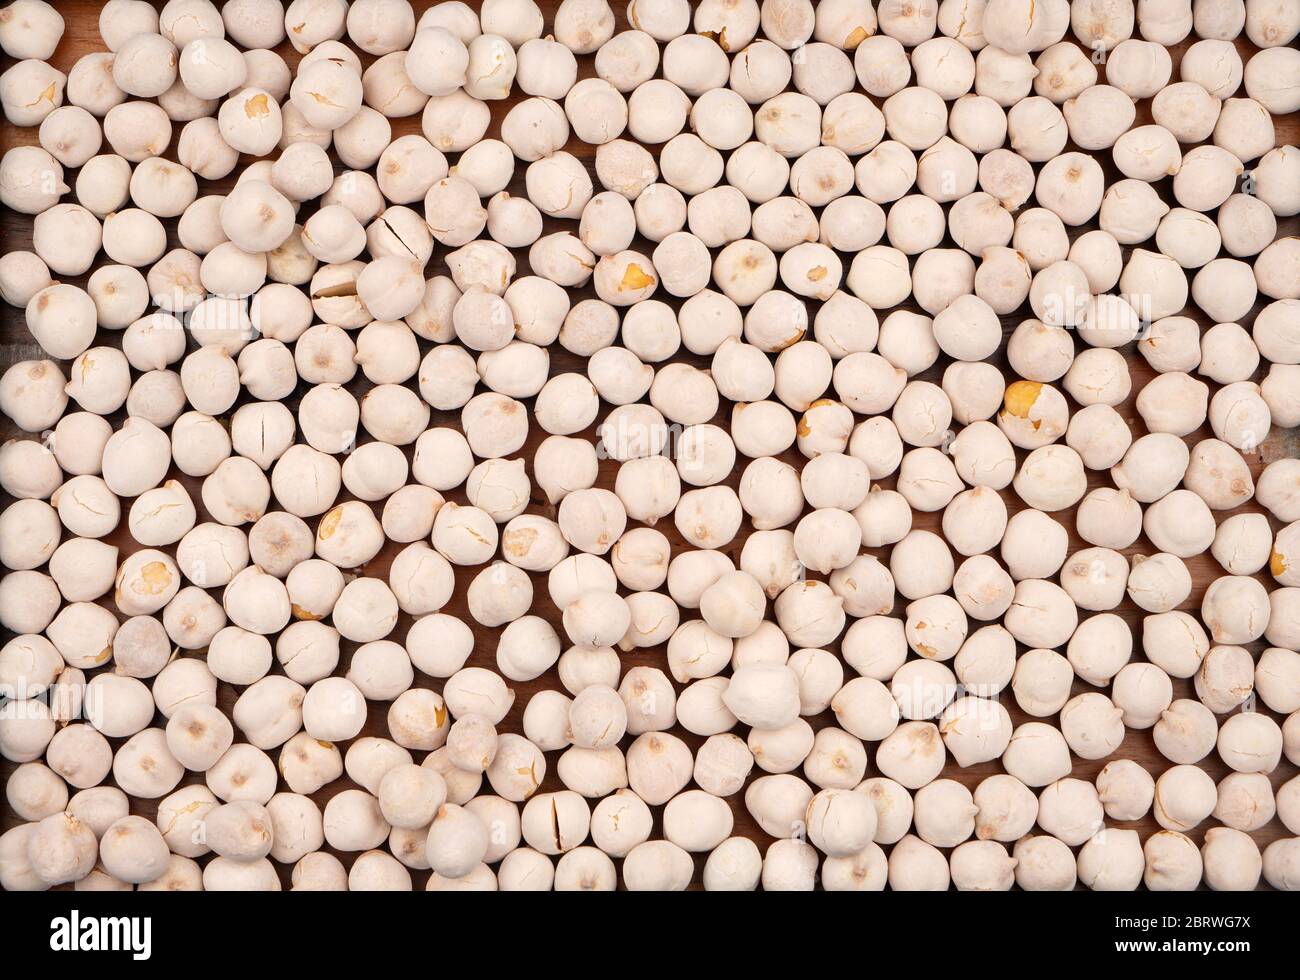 Organic White chickpeas. For texture or background. Stock Photo